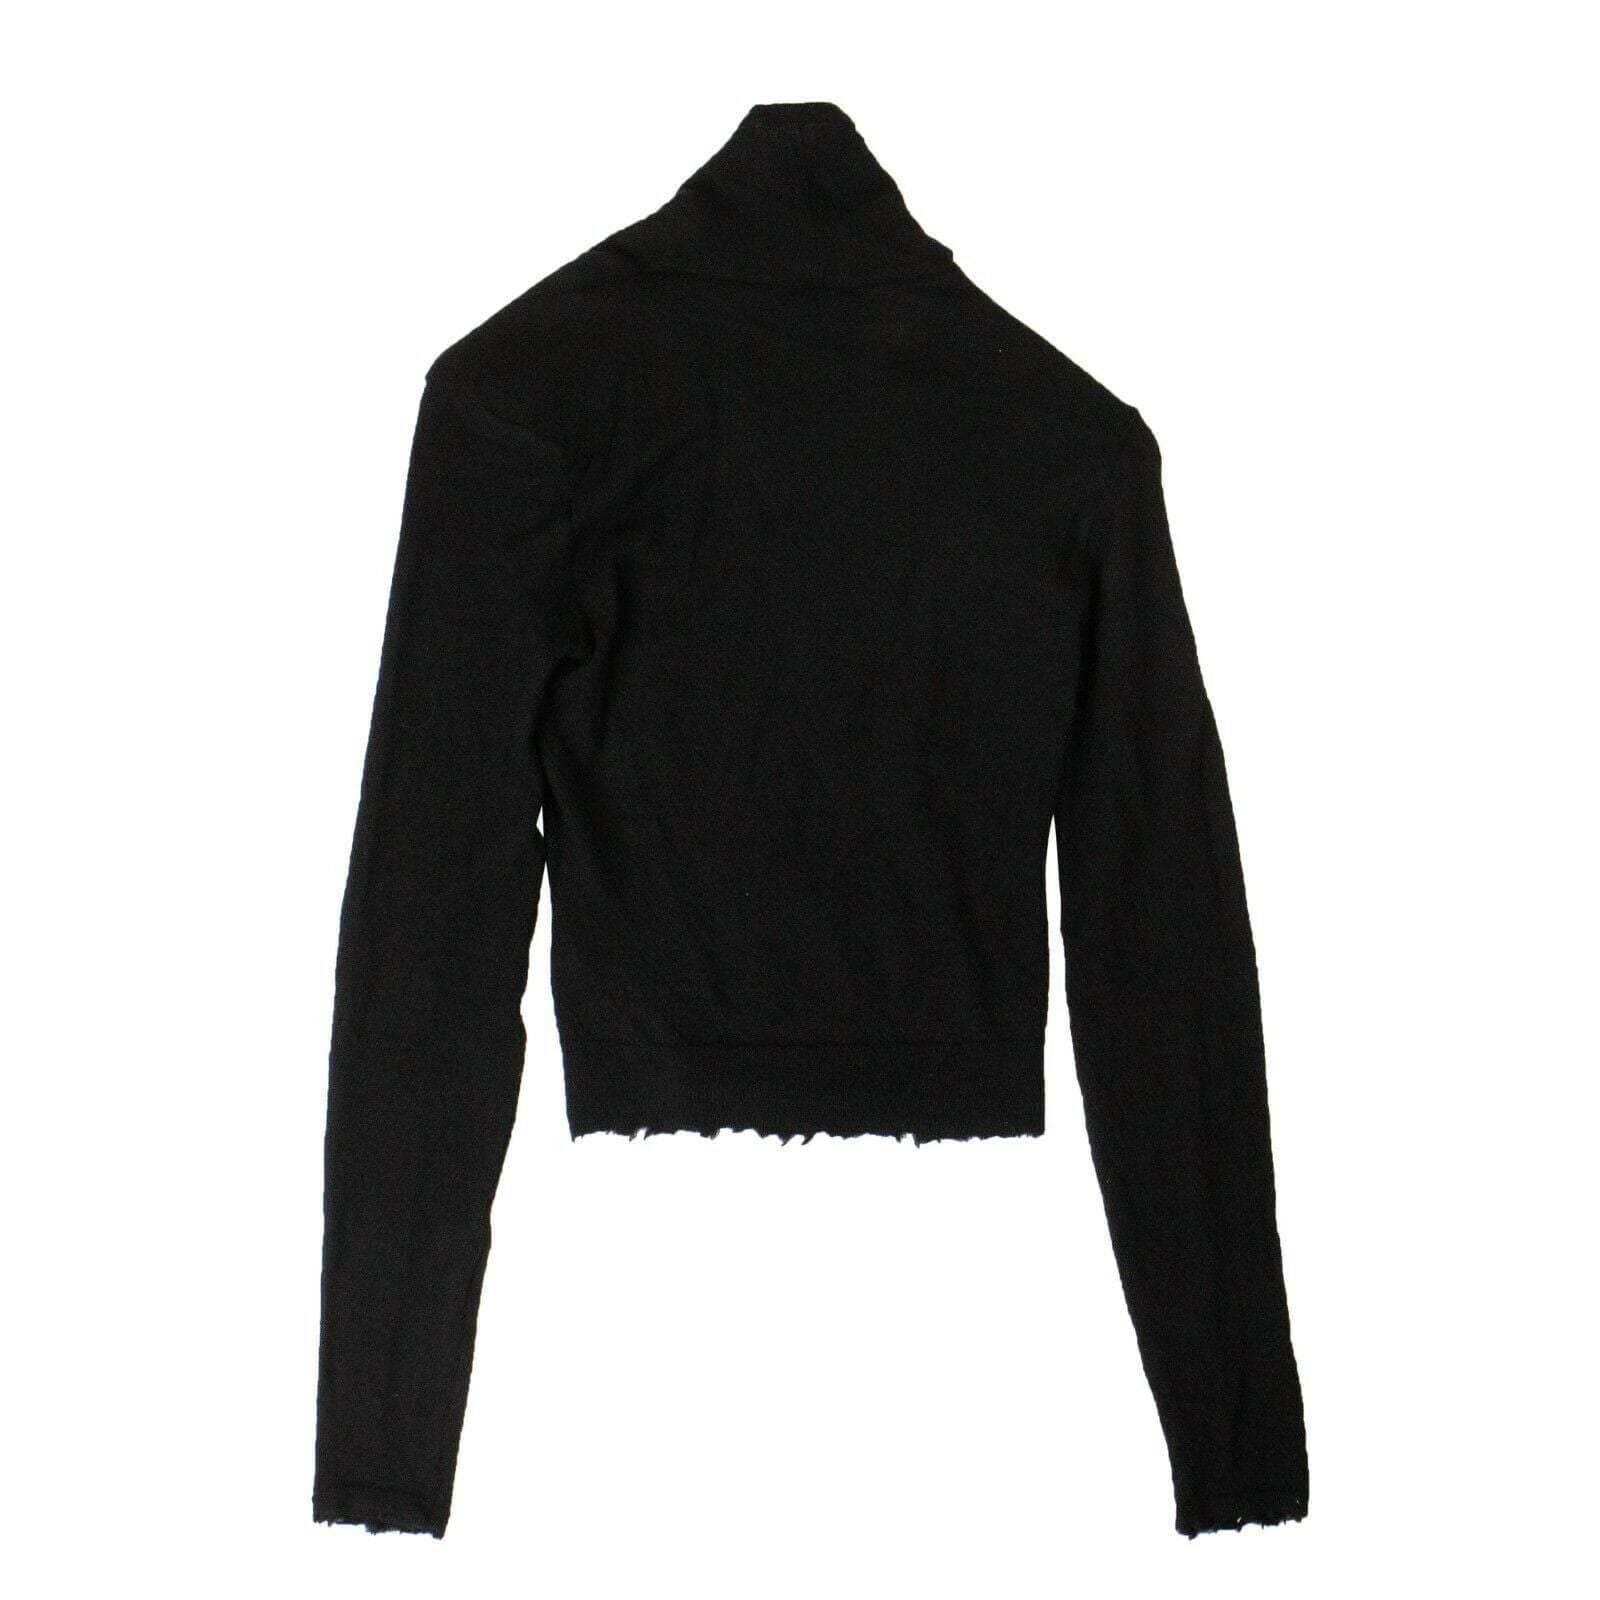 UNRAVEL PROJECT 250-500, channelenable-all, couponcollection, gender-womens, main-clothing, sale-enable, size-m, size-s, size-xs, unravel-project, womens-cashmere-sweaters XS Black Cashmere Distressed Details Sweater 82NGG-UN-1165/XS 82NGG-UN-1165/XS